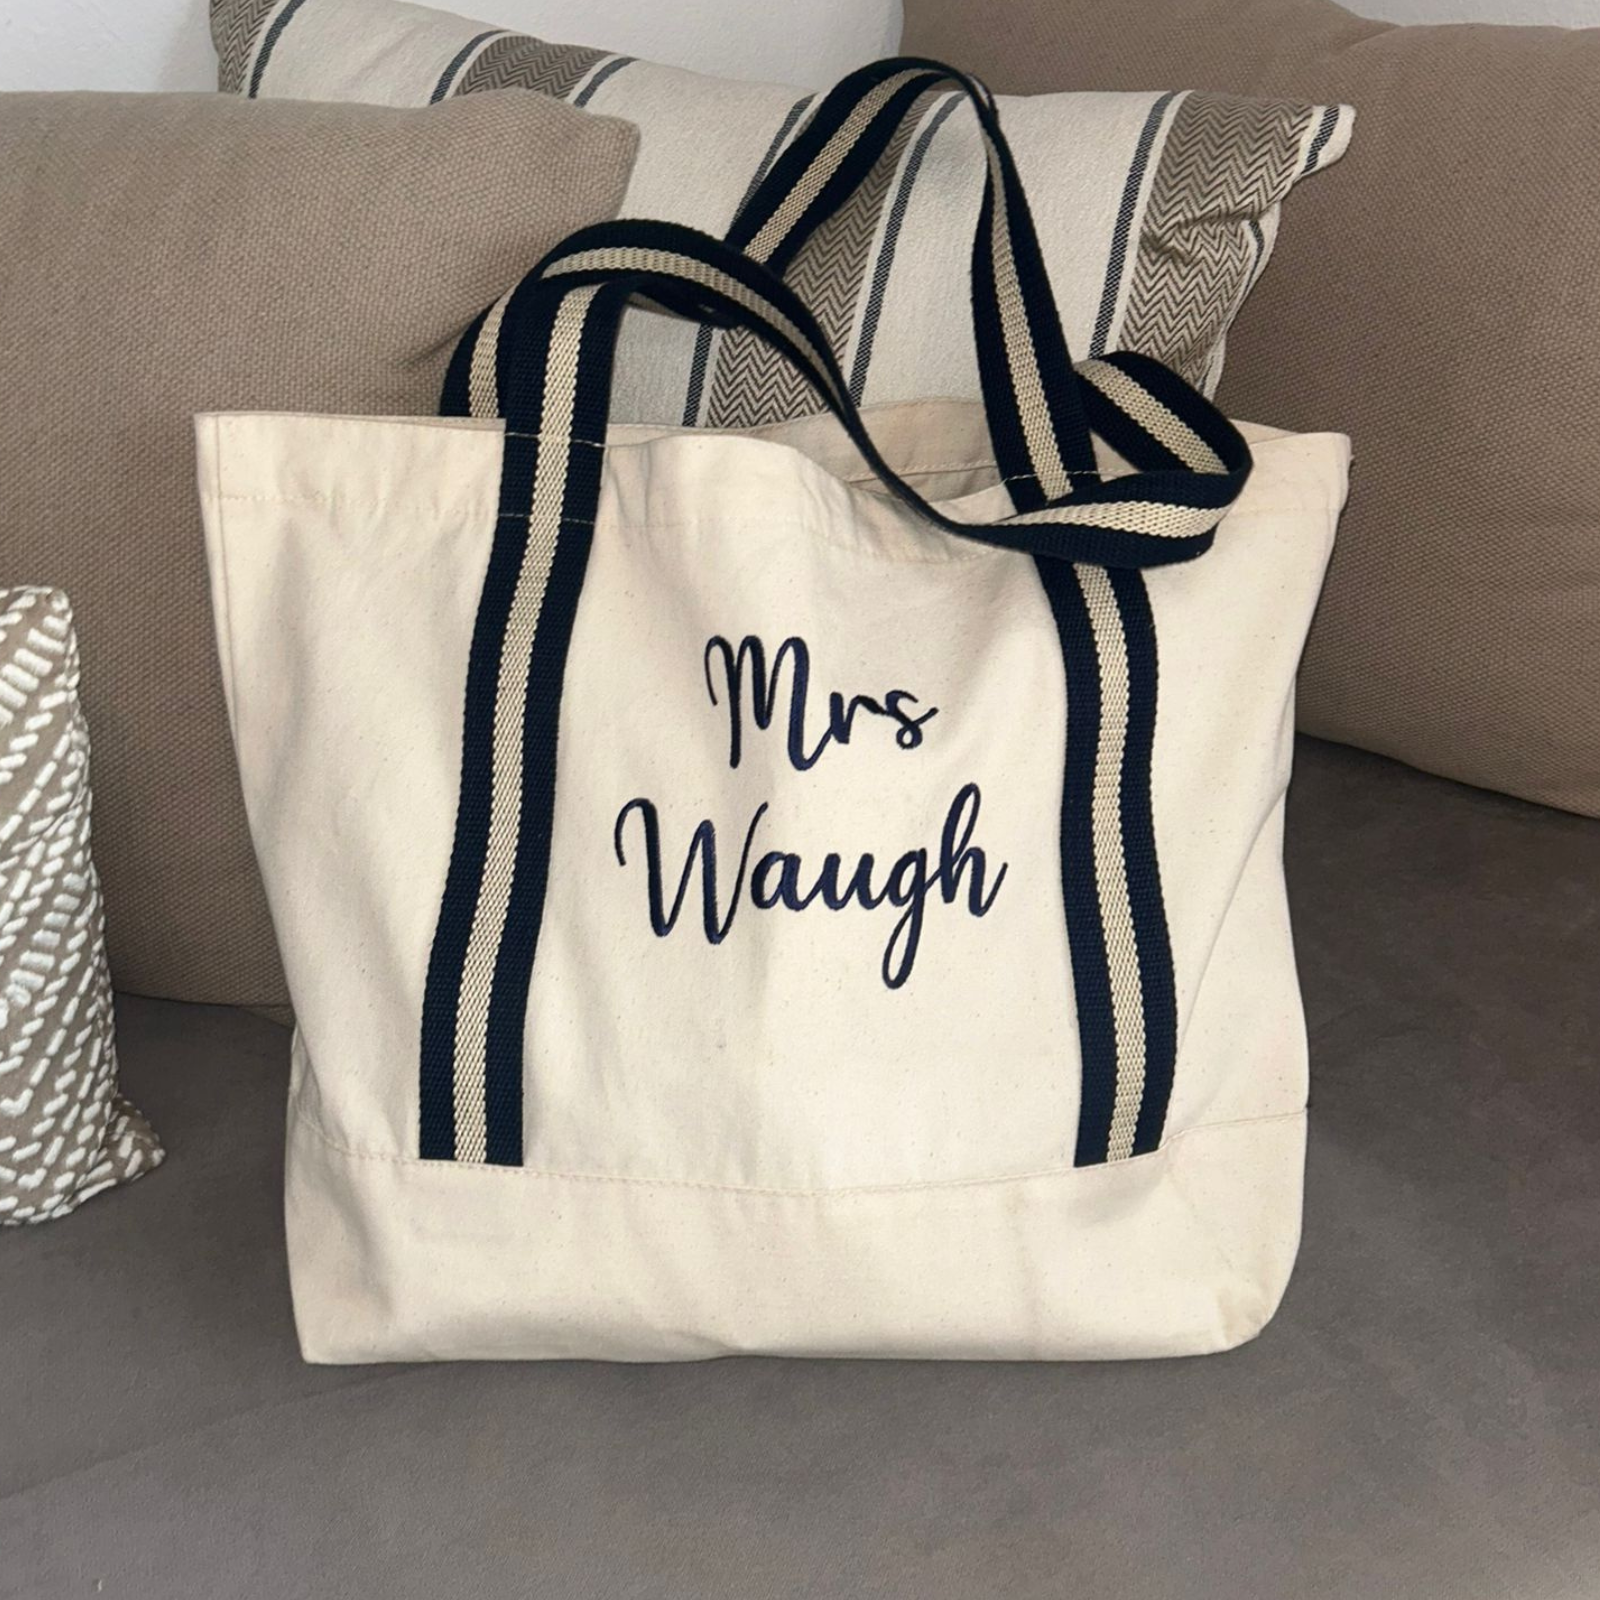 Image of a natural coloured tote bag with navy blue straps that has been personalised with a name embroidered in navy thread. The bag is available with four different strap colours, amber, red, navy and sage green and will be personalised in a matching thread colour.